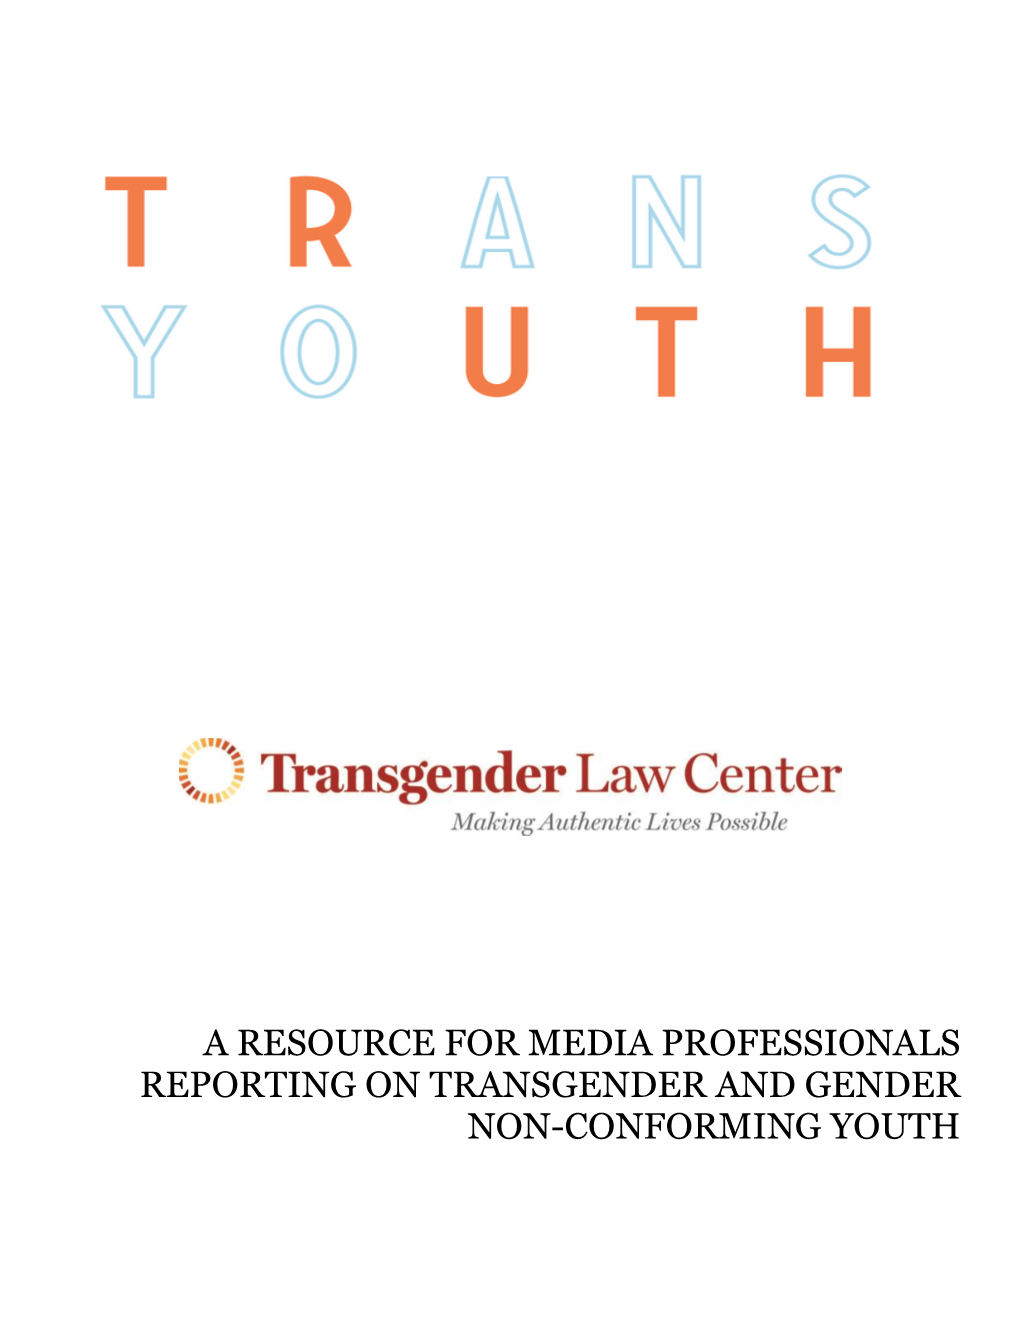 A Resource for Media Professionals Reporting on Transgender and Gender Non-Conforming Youth